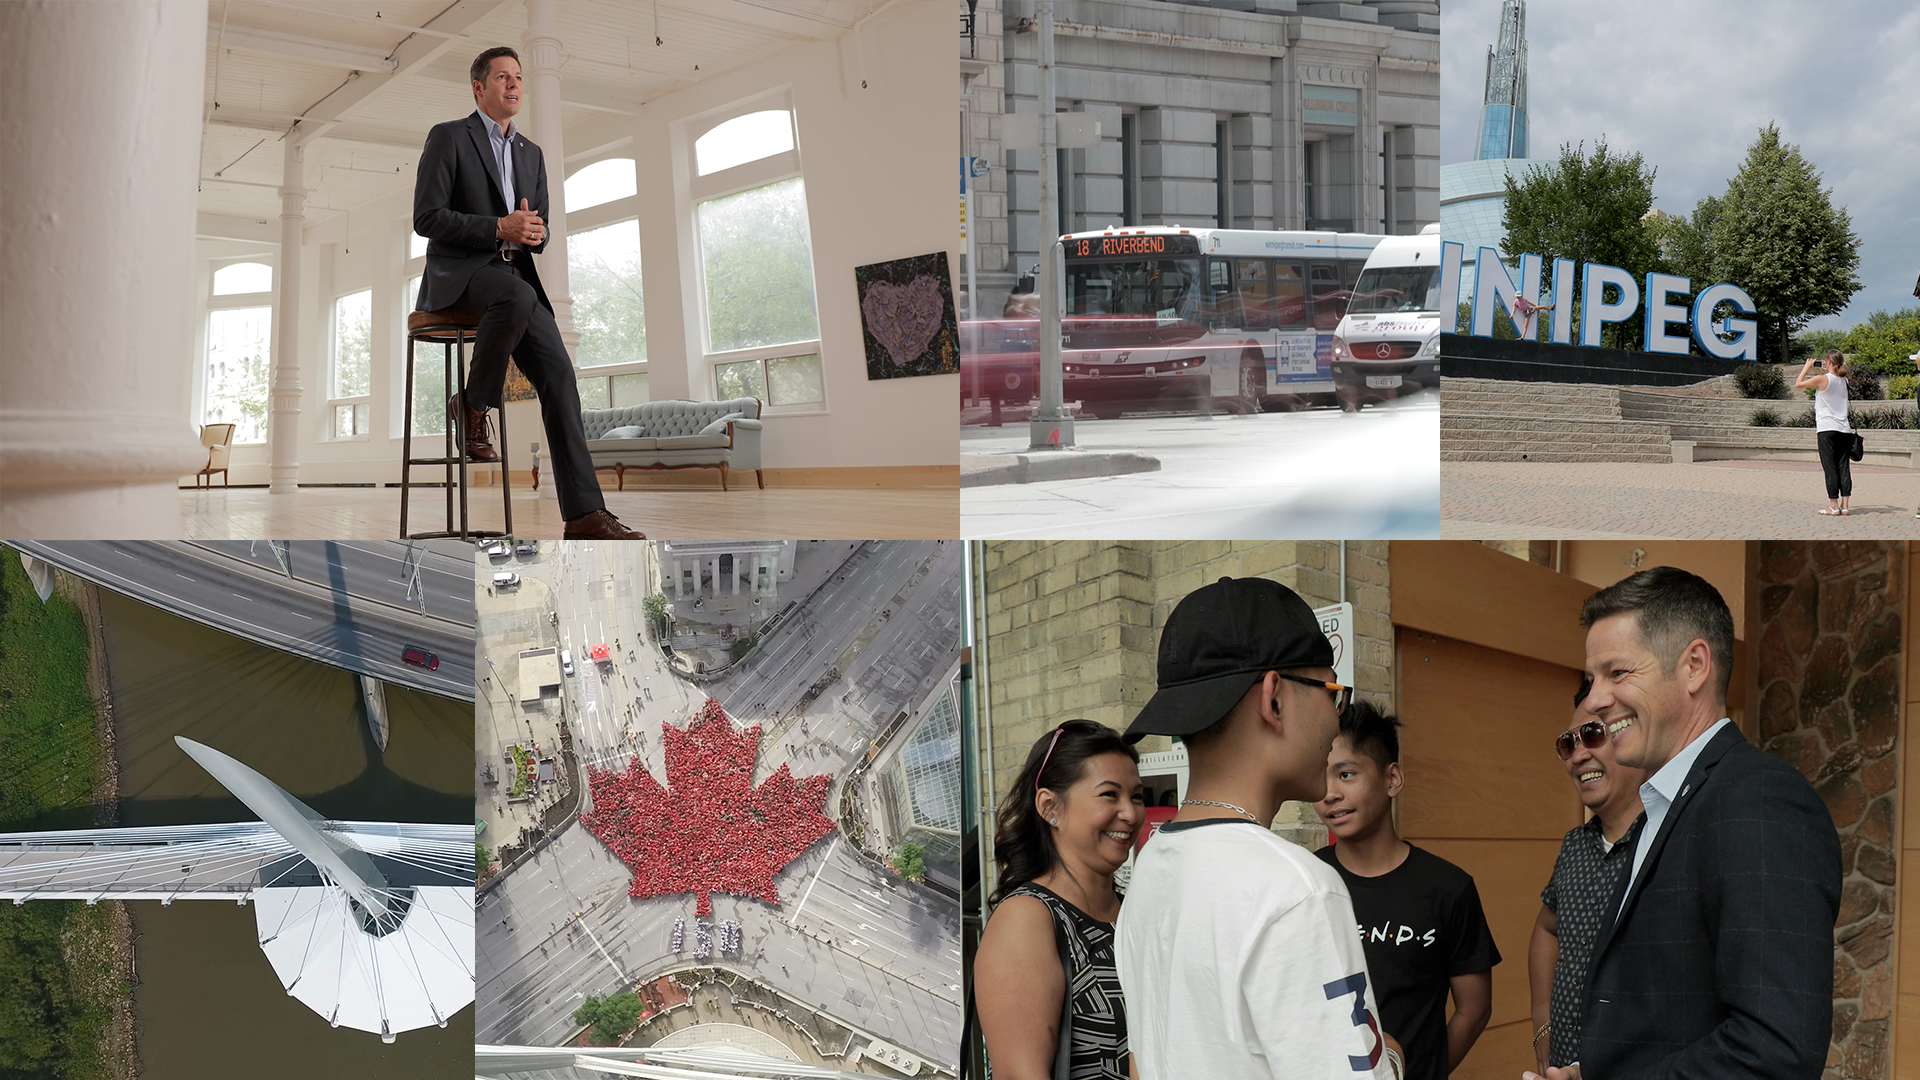 A collage of style frame images, featuring Mayor of Winnipeg, Bryan Bowman sitting on a chair, traffic in downtown Winnipeg, Esplanade Riel Pedestrian Bridge, an areal view of Winnipeg residents making a maple leaf shape with their bodies, the Winnipeg sign at the Forks, and Bryan Bowman talking with Winnipegers at the Forks.